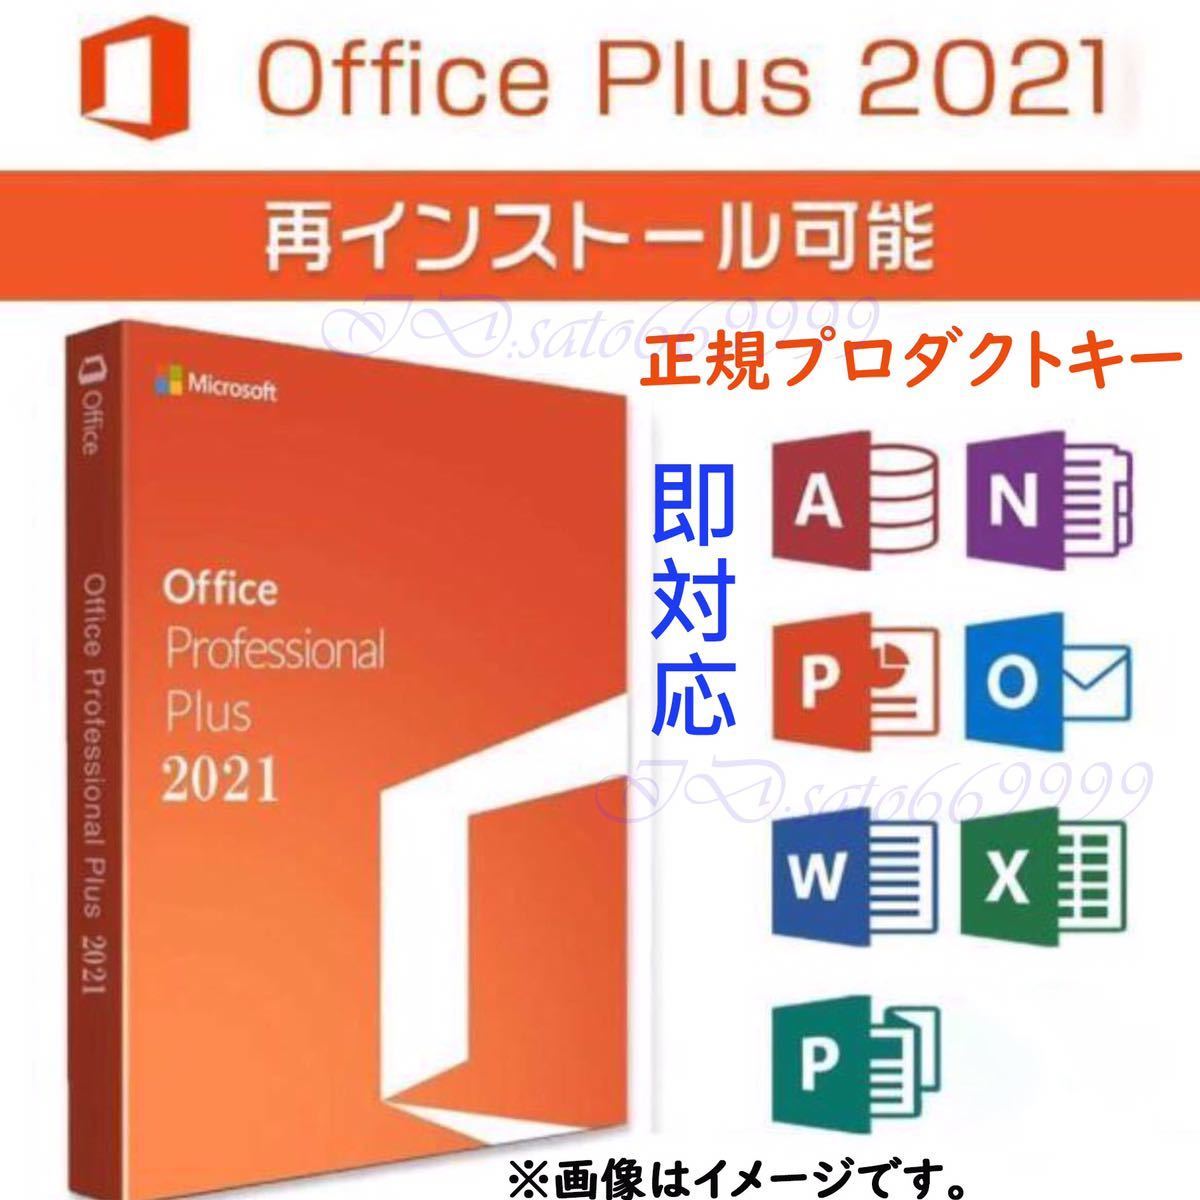 Microsoft Office 2021 Professional Plus. year regular goods Pro duct key * Access Word Excel PowerPoint certification guarantee Japanese procedure document fire 